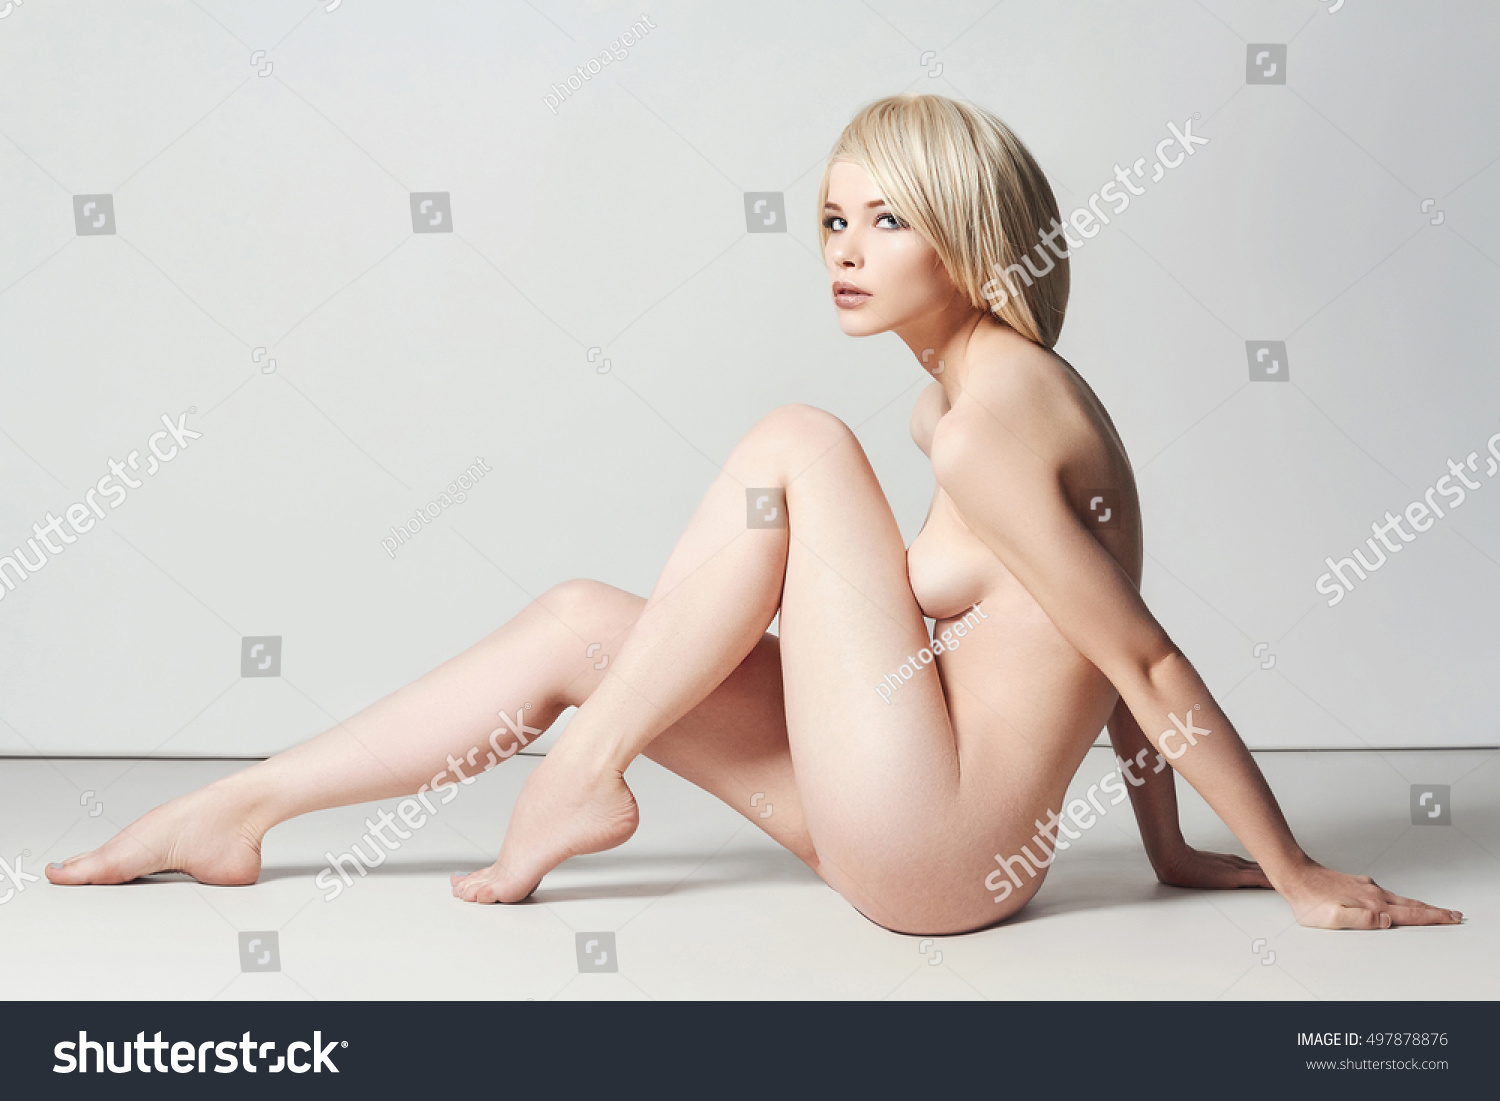 Naked sexy woman nude